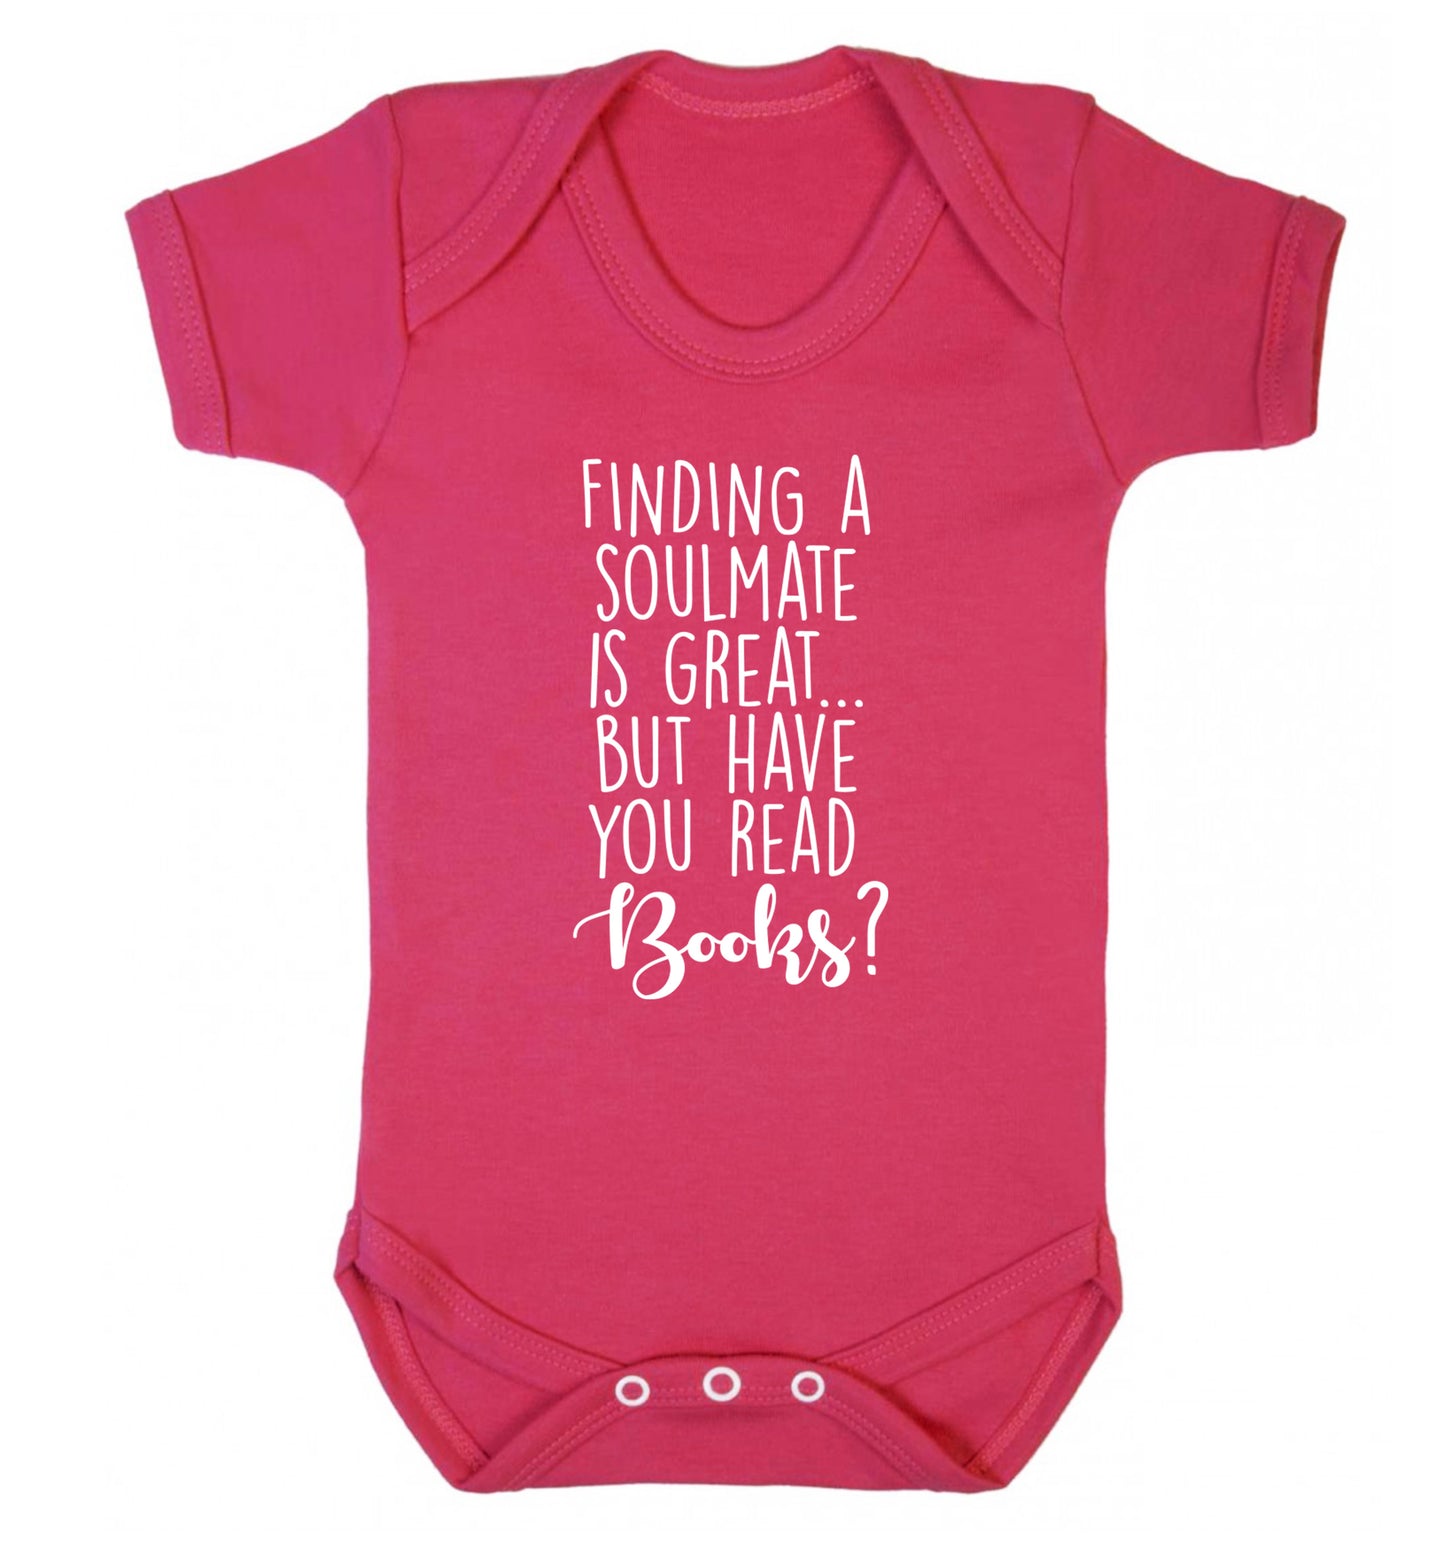 Finding a soulmate is great but have you read books? Baby Vest dark pink 18-24 months